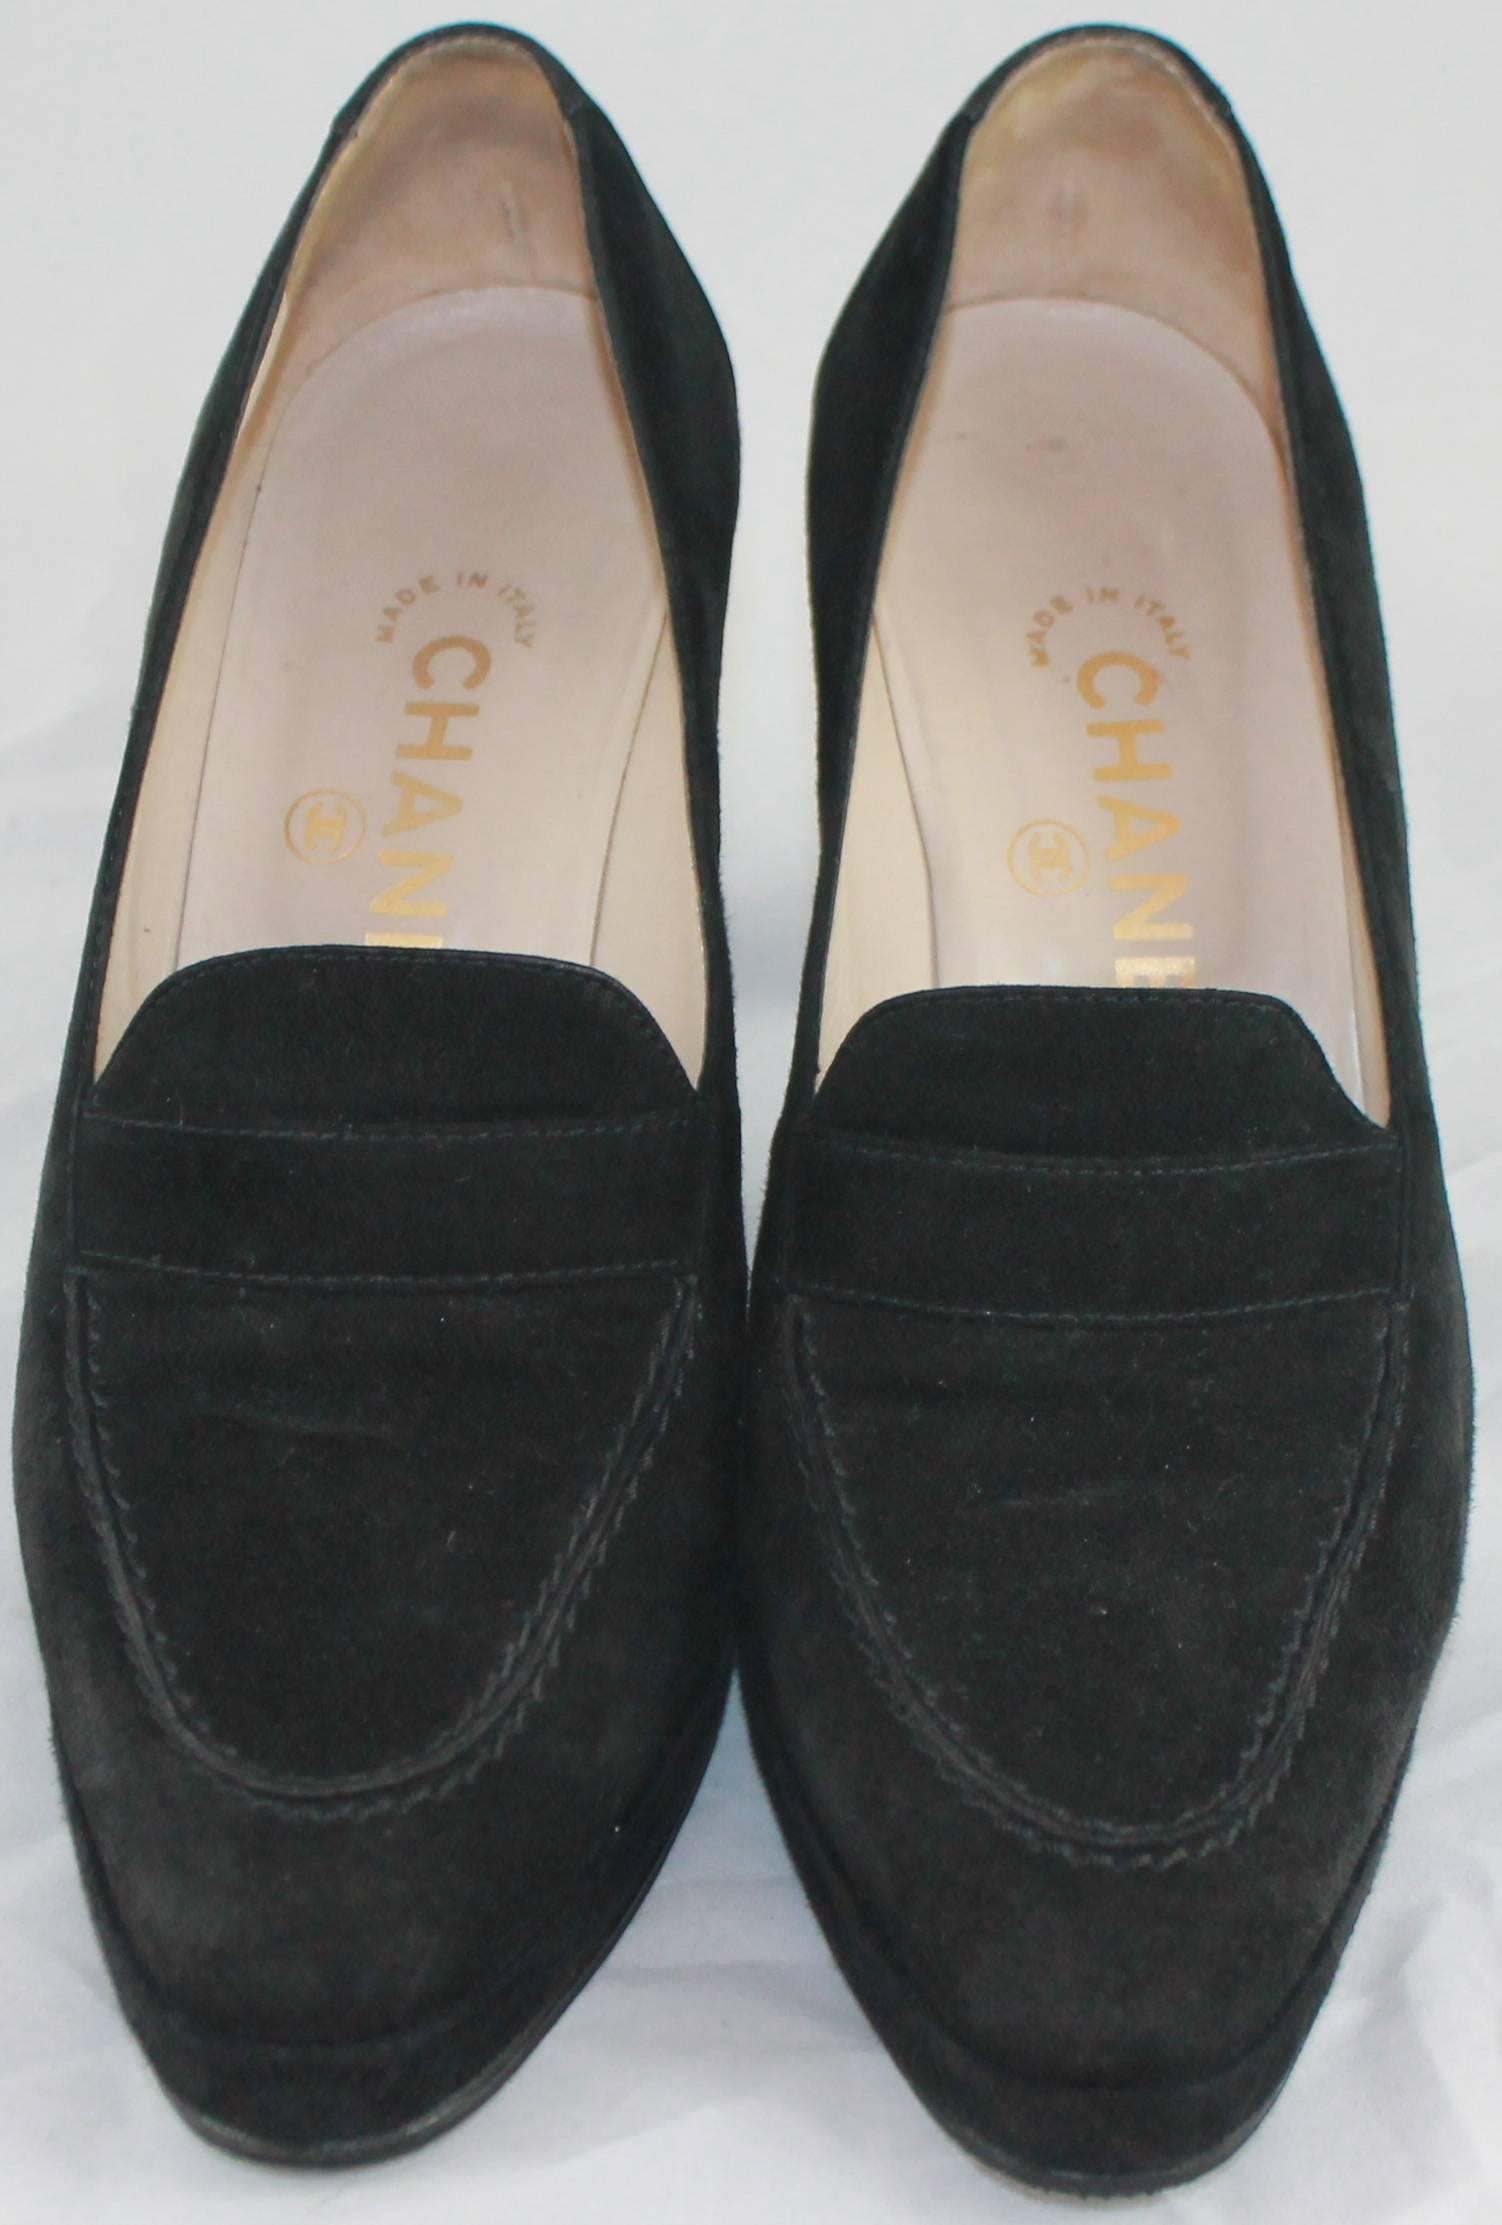 Women's Chanel Black Suede Loafer Style Pumps - 36.5